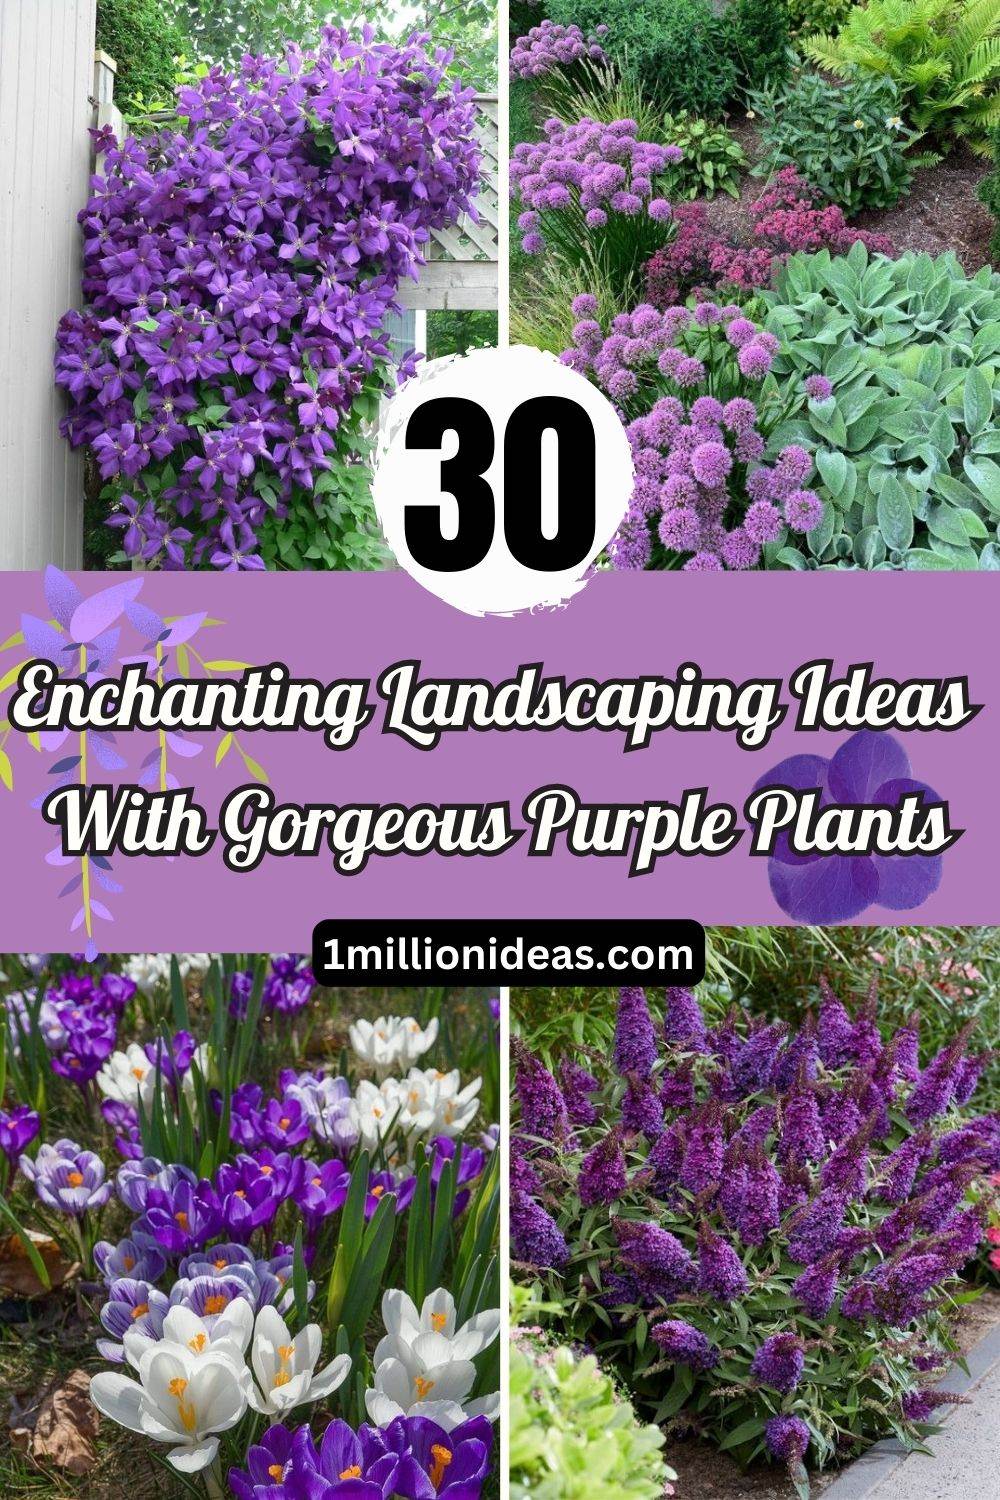 30 Enchanting Landscaping Ideas With Gorgeous Purple Plants - 191